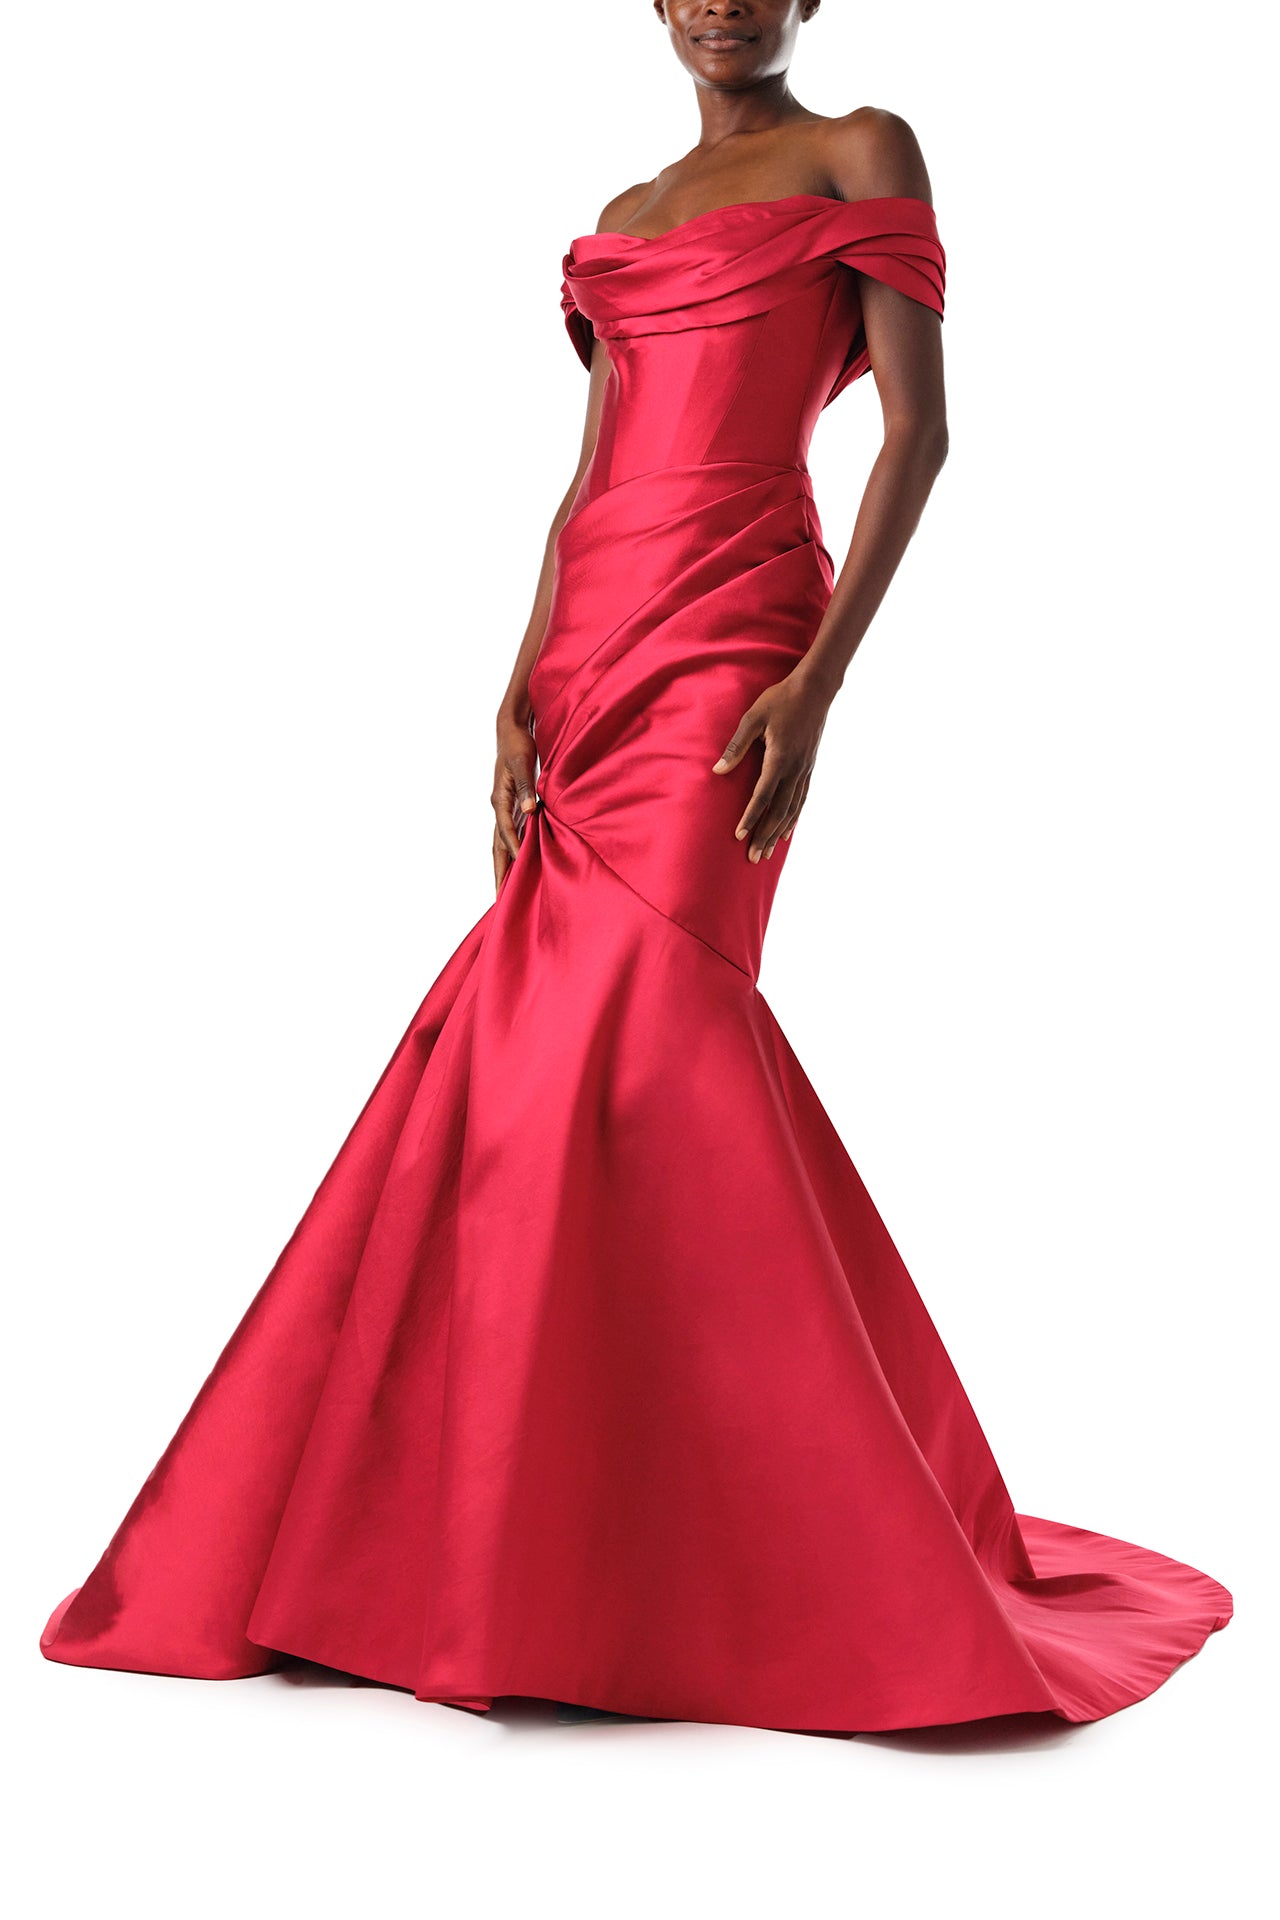 Monique Lhuillier Fall 2024 scarlet mikado, off-the-shoulder, draped gown with trumpet skirt and low back - front.